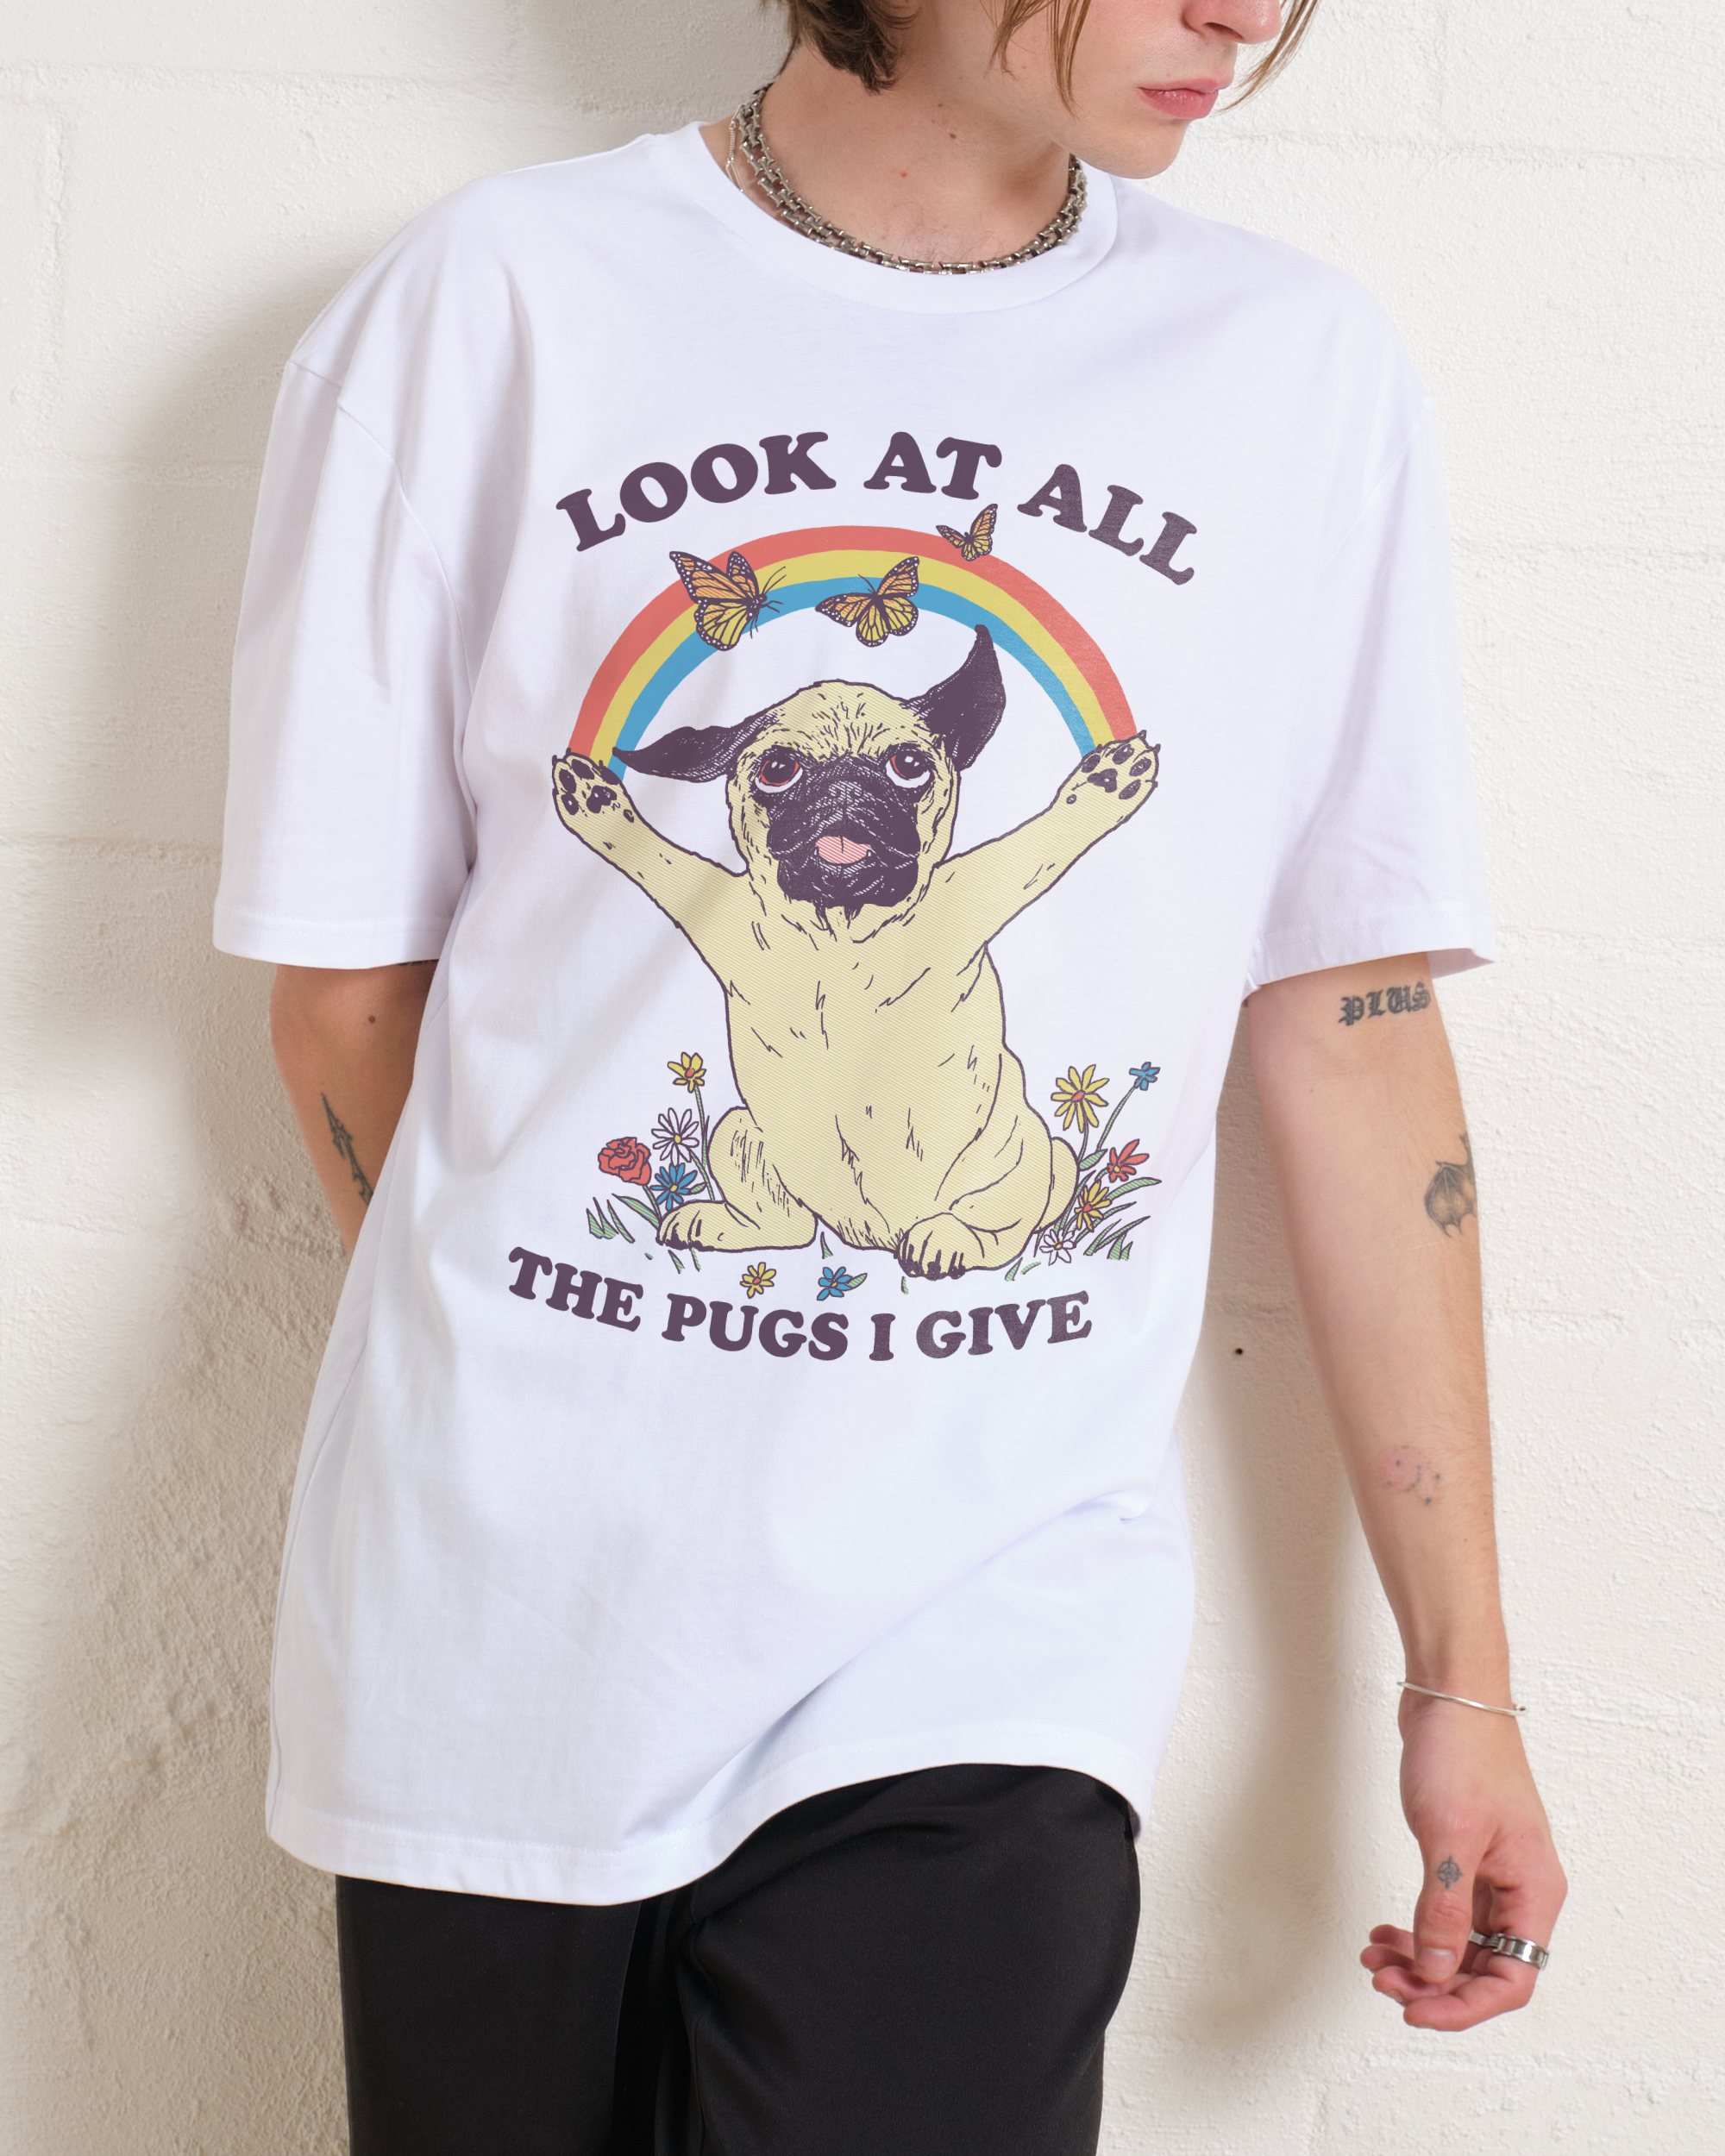 All the Pugs I Give T-Shirt